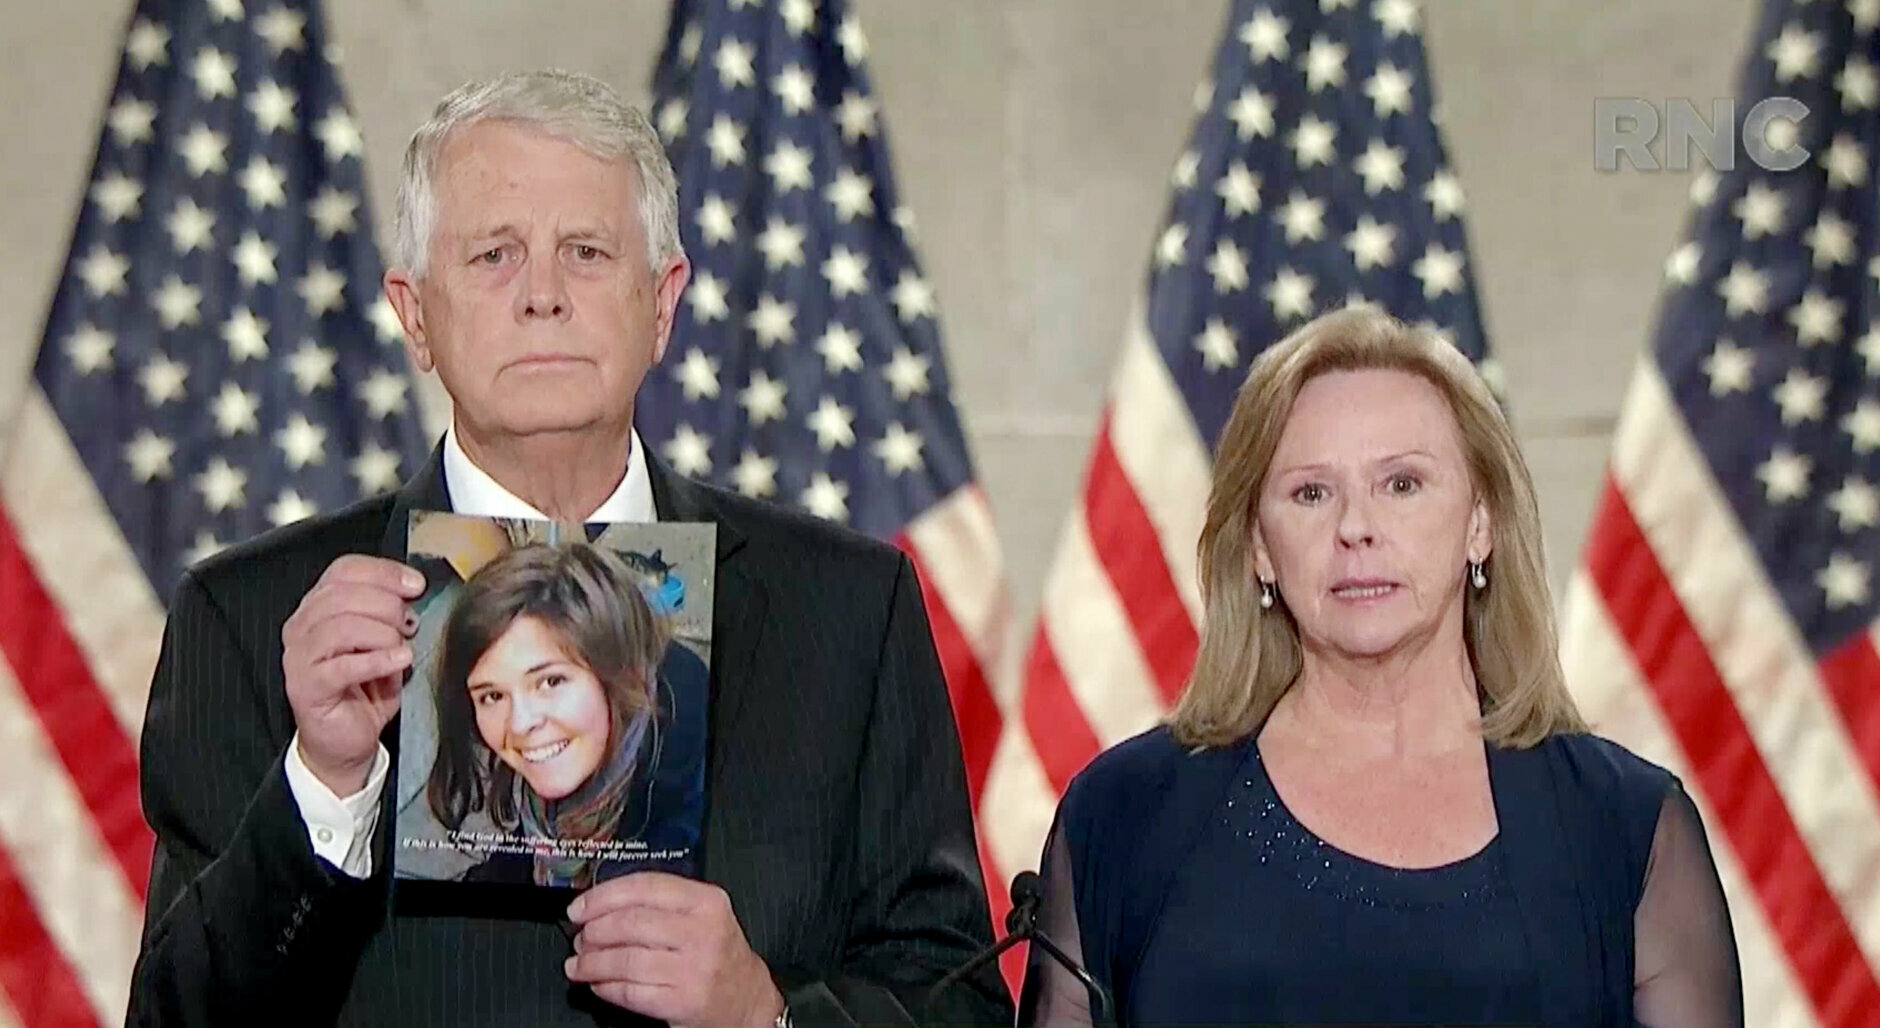 CHARLOTTE, NC - AUGUST 27: (EDITORIAL USE ONLY) In this screenshot from the RNC’s livestream of the 2020 Republican National Convention, Carl and Marsha Mueller, parents of humanitarian worker Kayla Mueller who was killed by ISIS, address the virtual convention on August 27, 2020. The convention is being held virtually due to the coronavirus pandemic but will include speeches from various locations including Charlotte, North Carolina and Washington, DC. (Photo Courtesy of the Committee on Arrangements for the 2020 Republican National Committee via Getty Images)